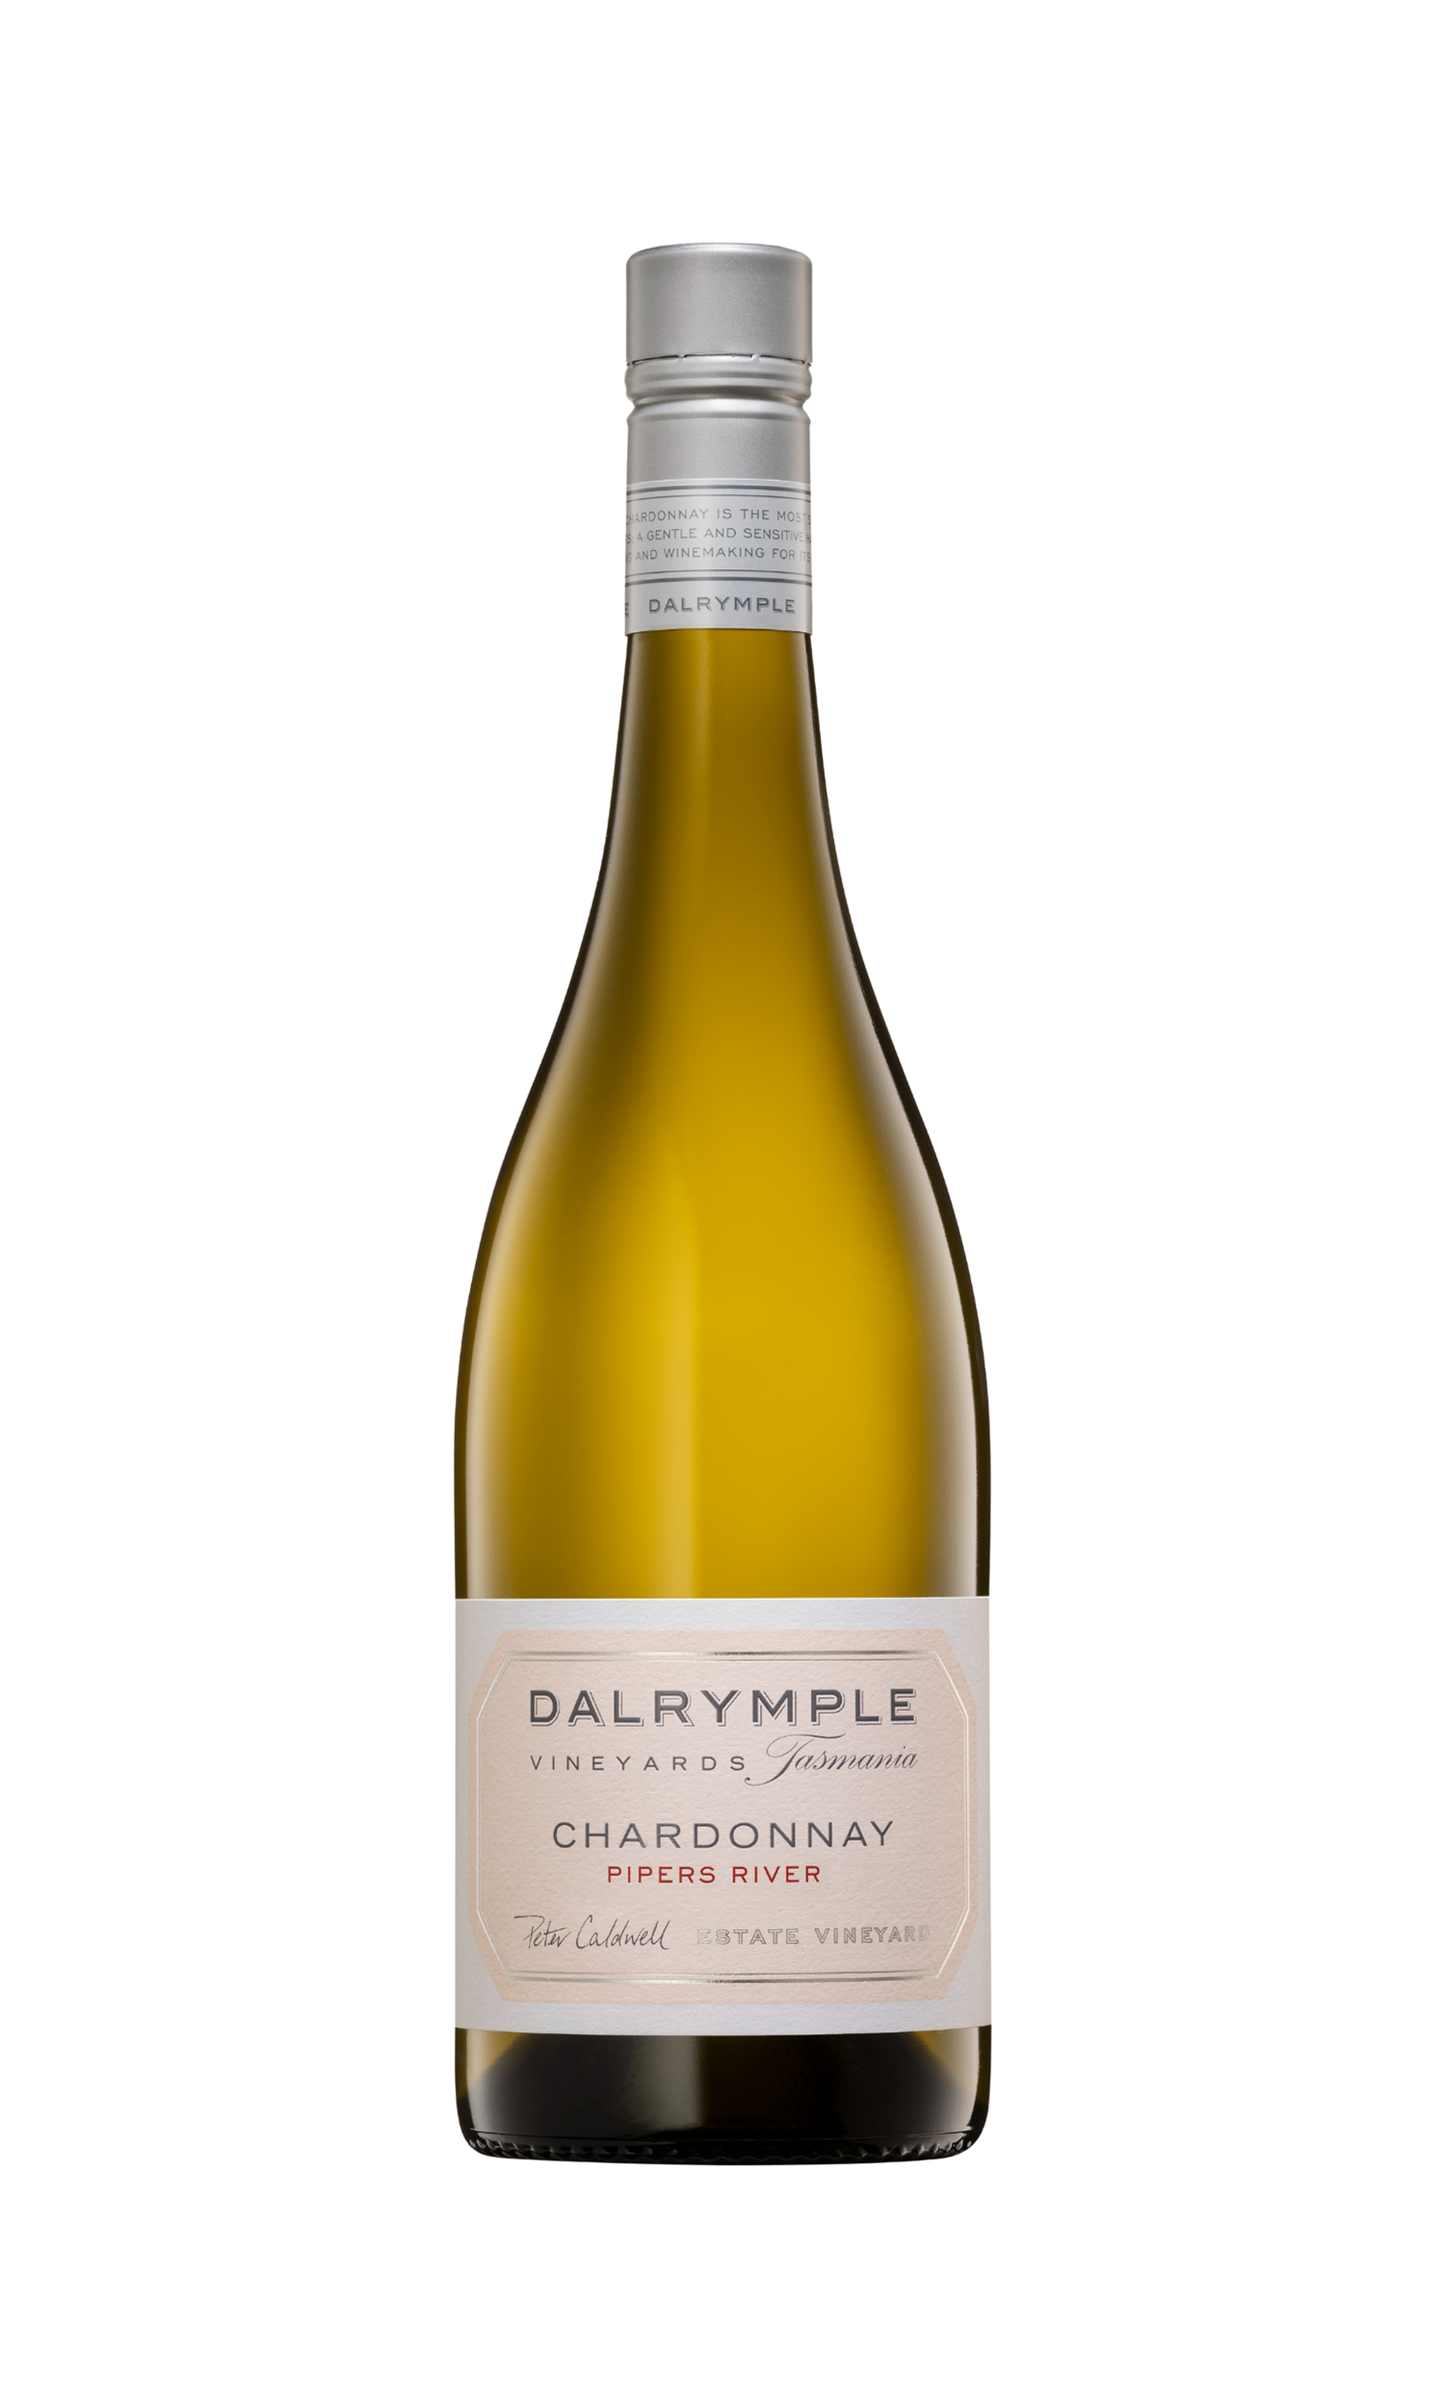 Dalrymple Pipers River Chardonnay 2021